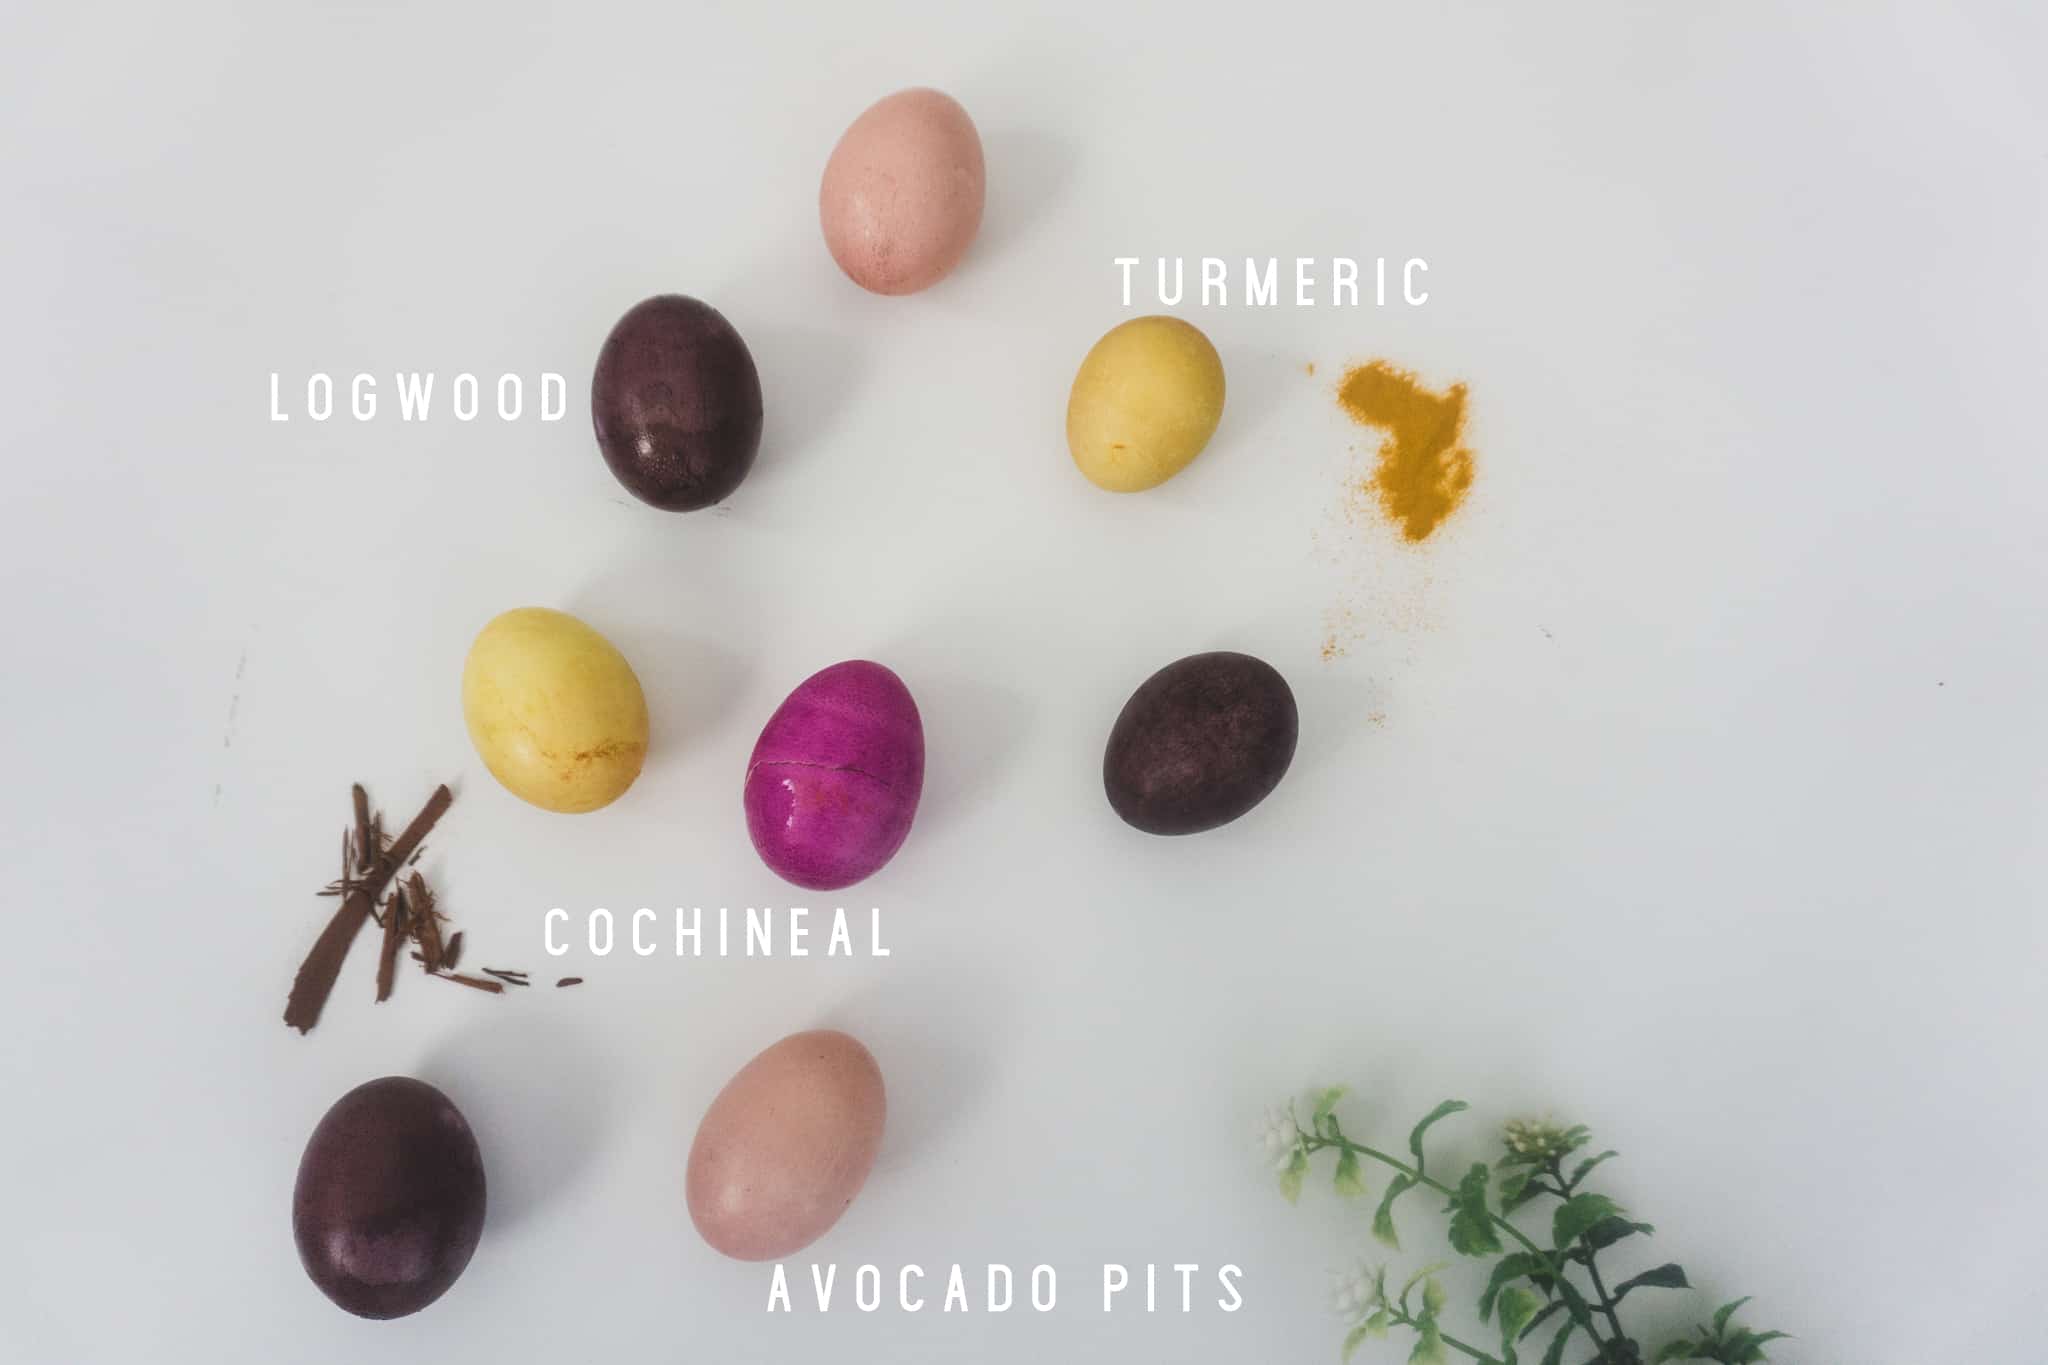 Dye your eggs using natural dyes and hard boil them at the same time with this instant pot eggs tutorial. There are so many different color options!